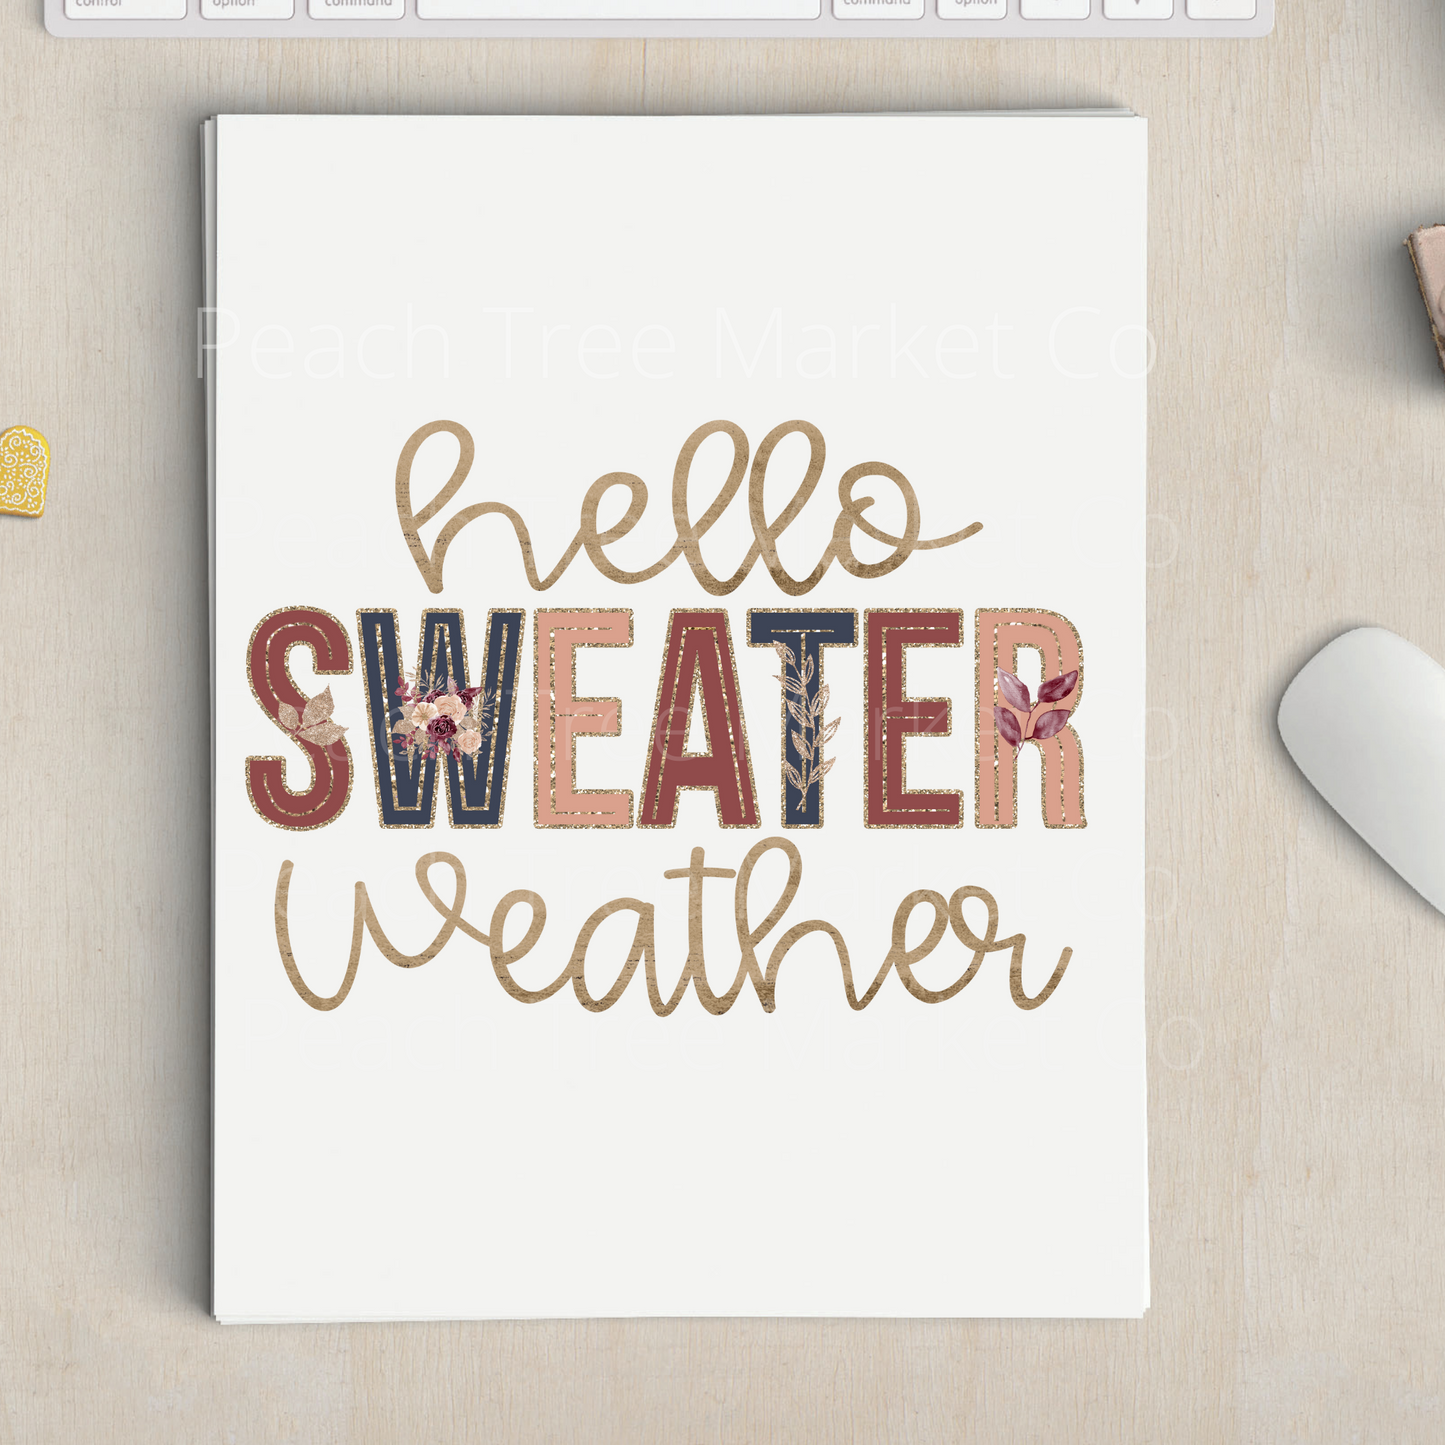 Hello Sweater Weather Sublimation Transfer